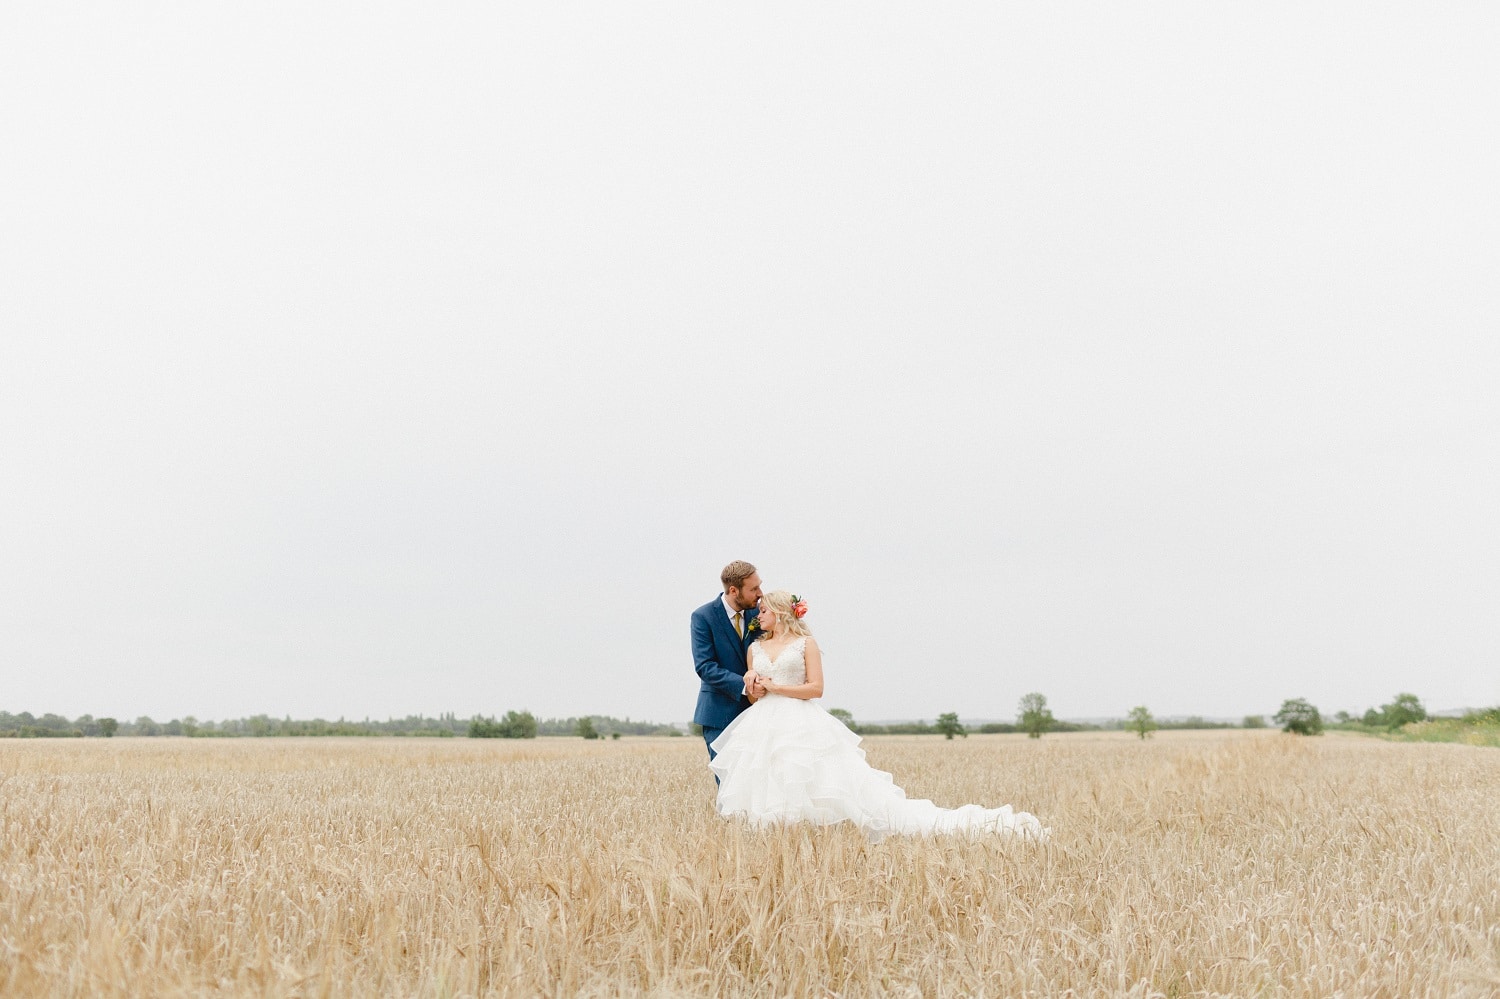 Just Married Couple at Farm Wedding Venue in crop field